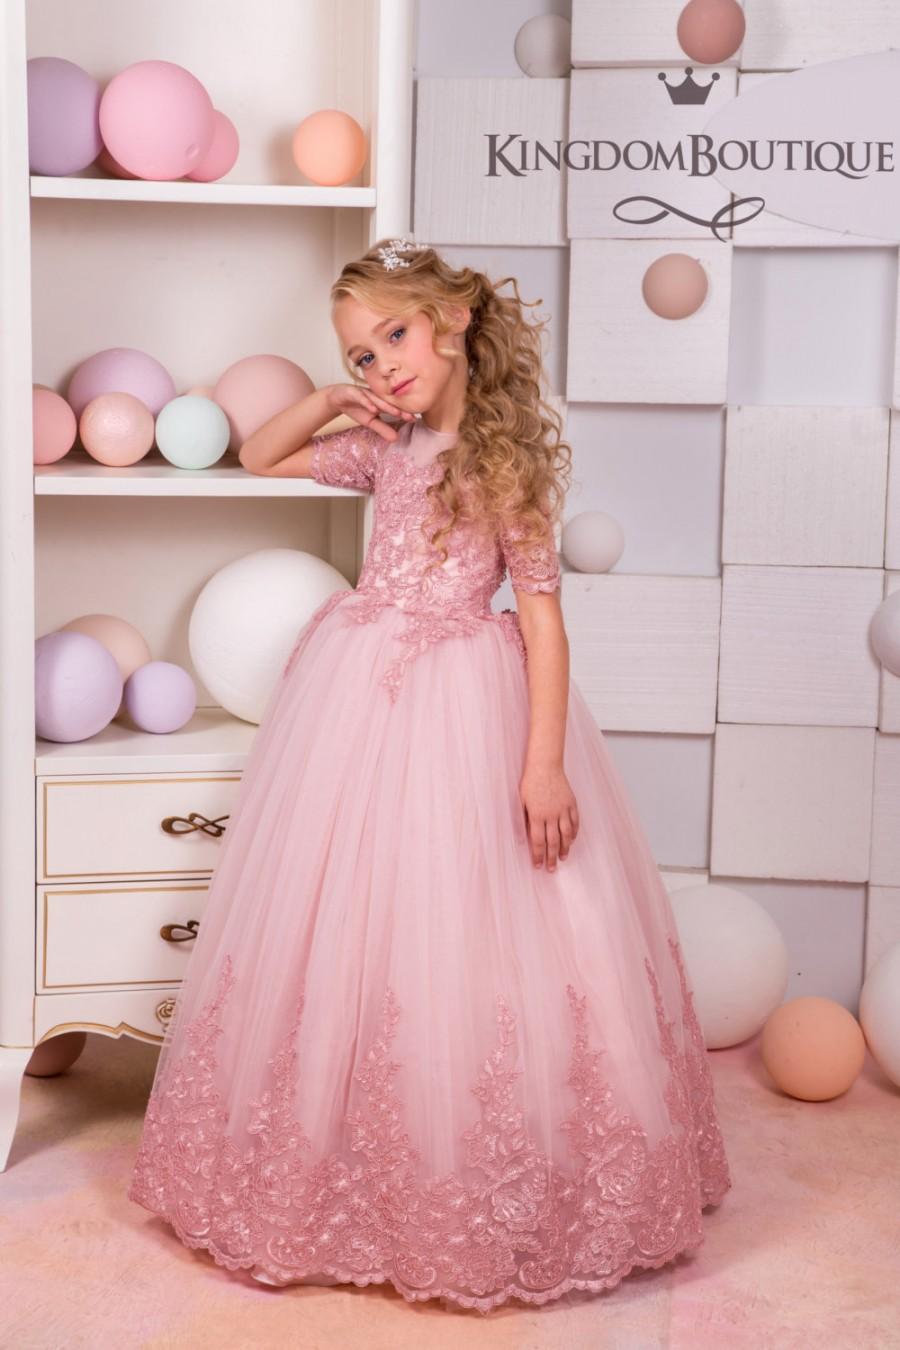 Blush Pink Lace Tulle Flower Girl Dress - Wedding Party Holiday ...